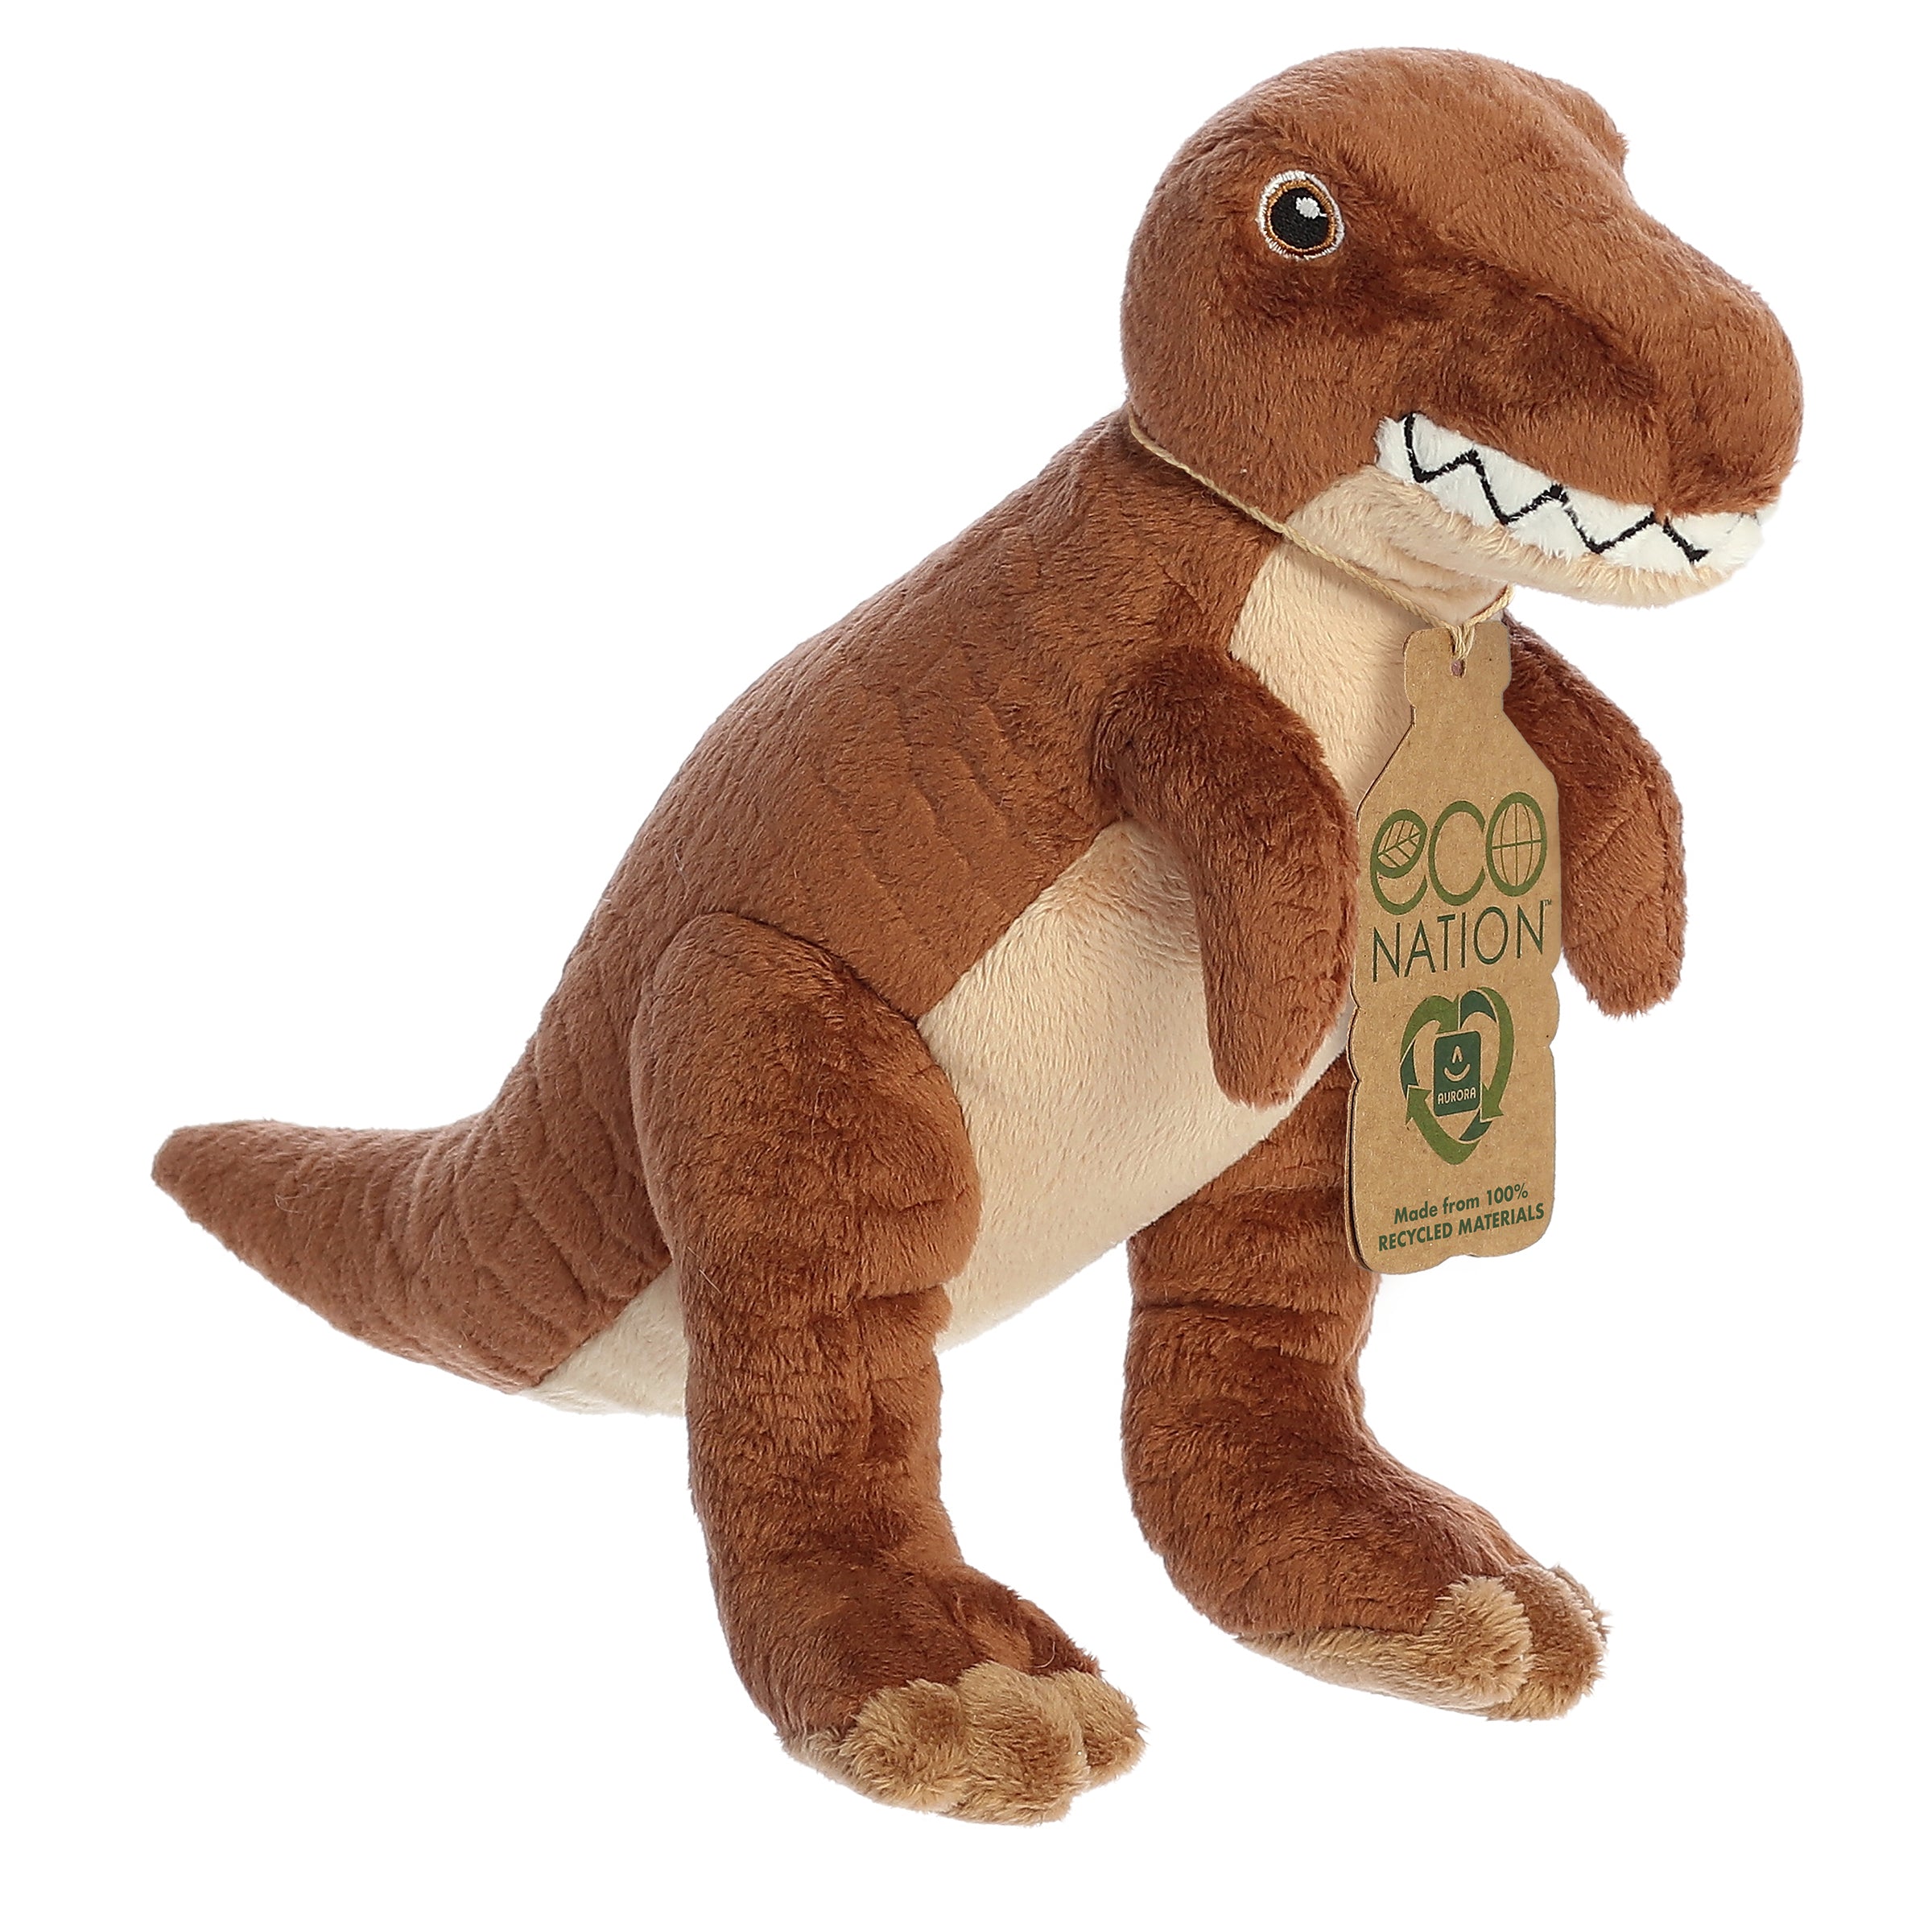 A fiercely lovable T-rex plush with a brown coat, exposed teeth, gentle embroidered eyes, and an eco-nation tag